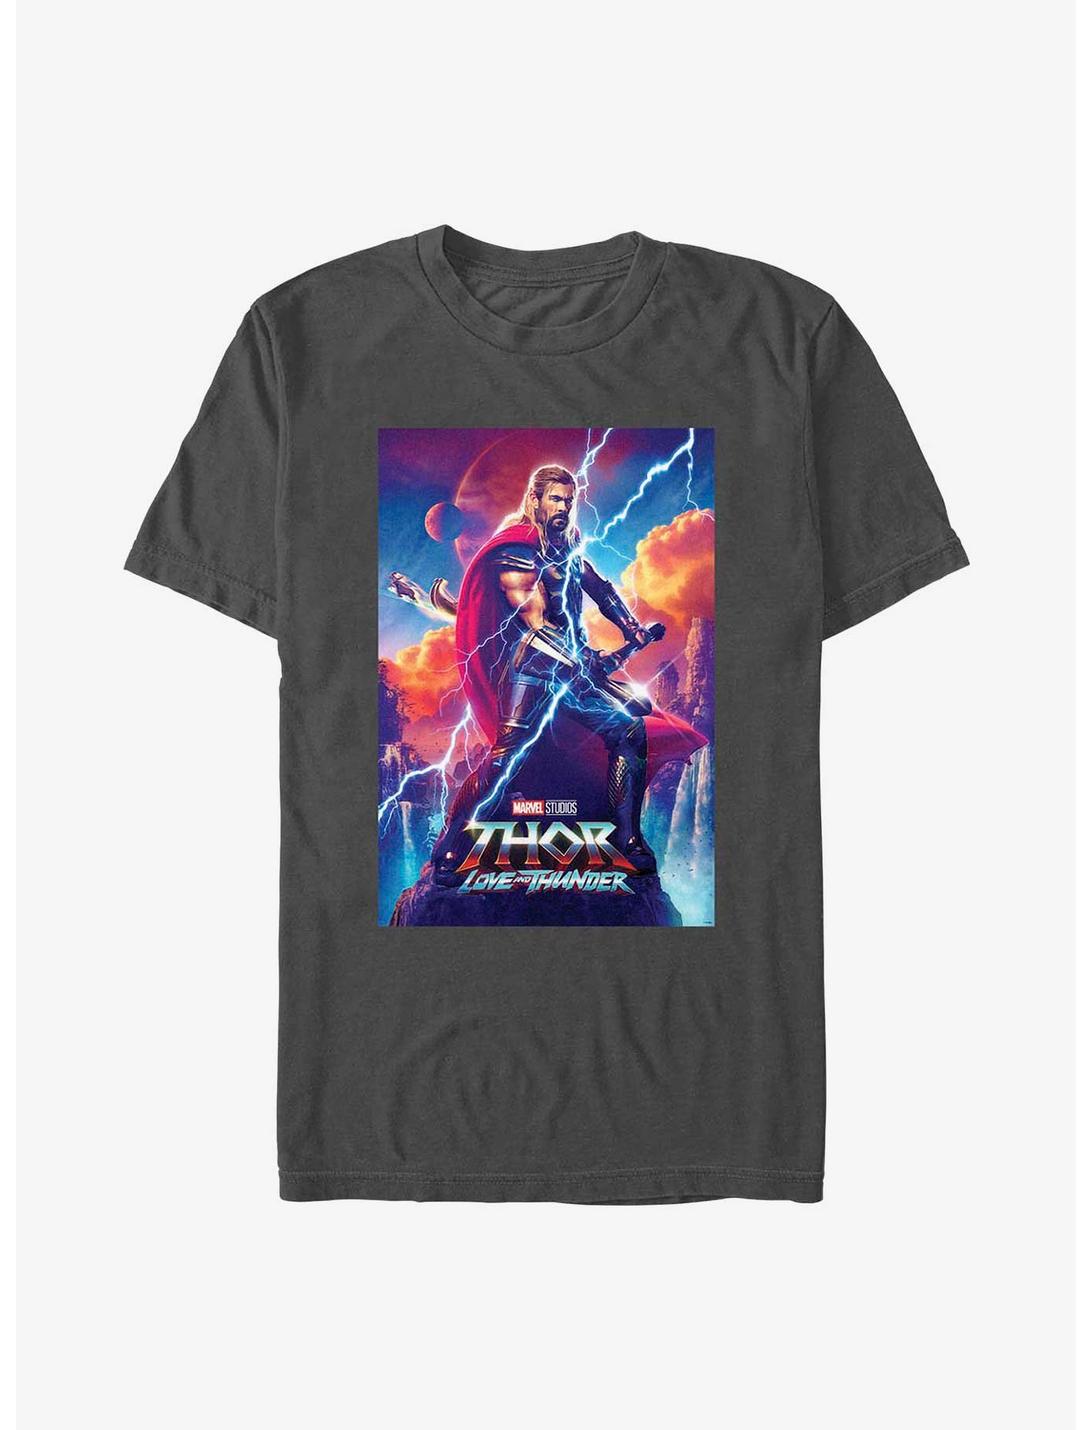 Marvel Thor: Love and Thunder Asgardian Movie Poster T-Shirt, CHARCOAL, hi-res